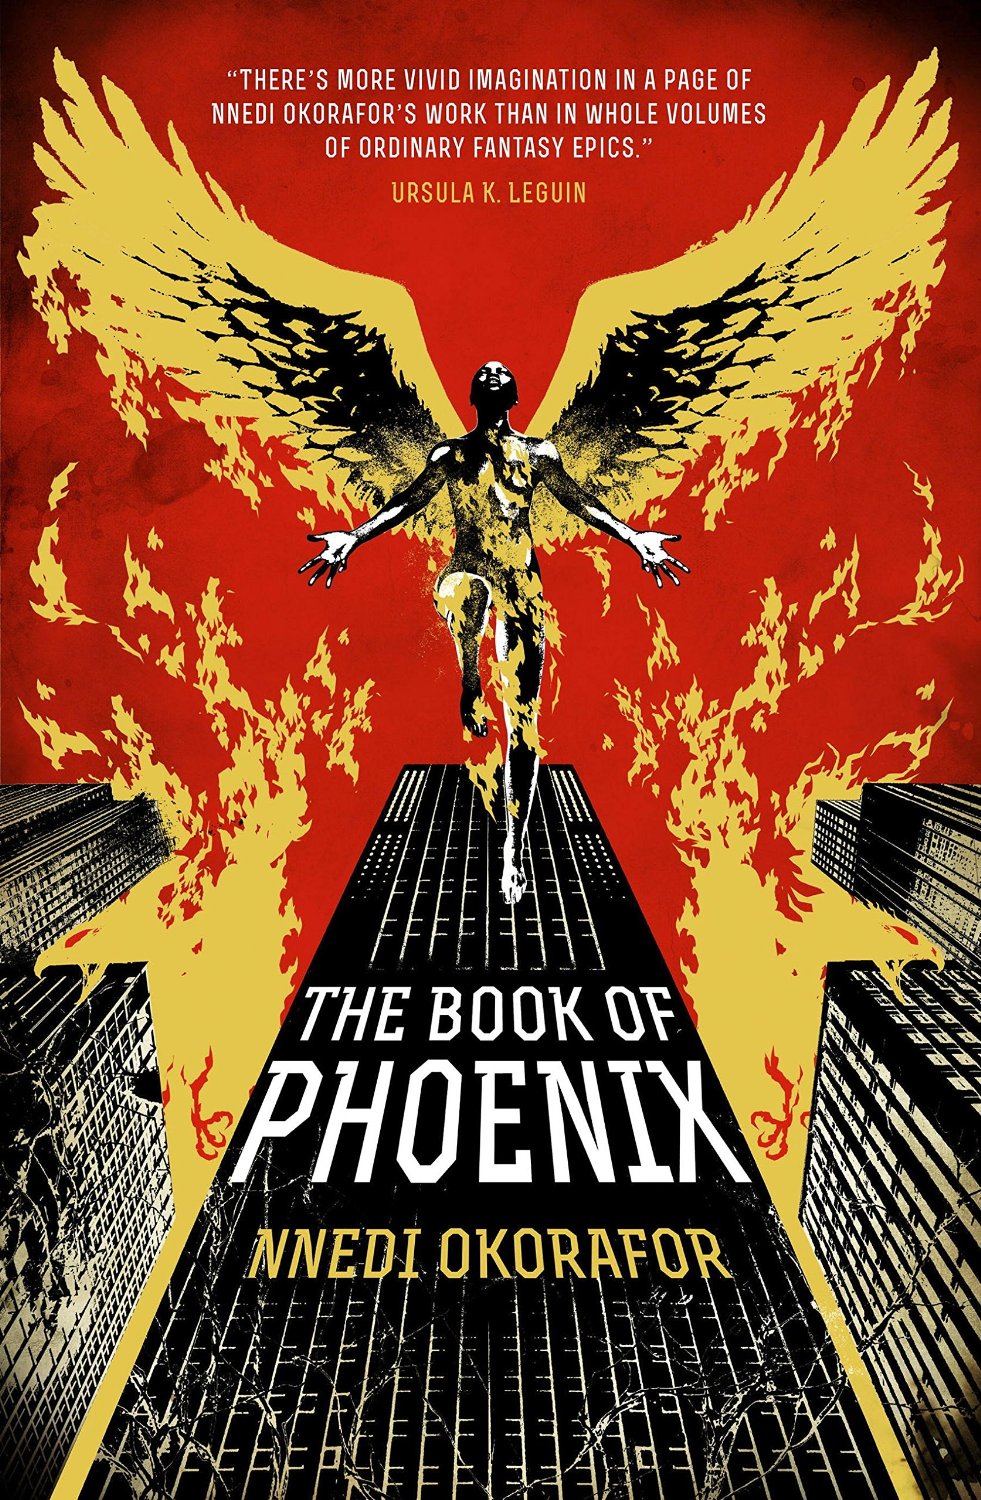 The Book Of Phoenix by Nnedi Okorafor book review